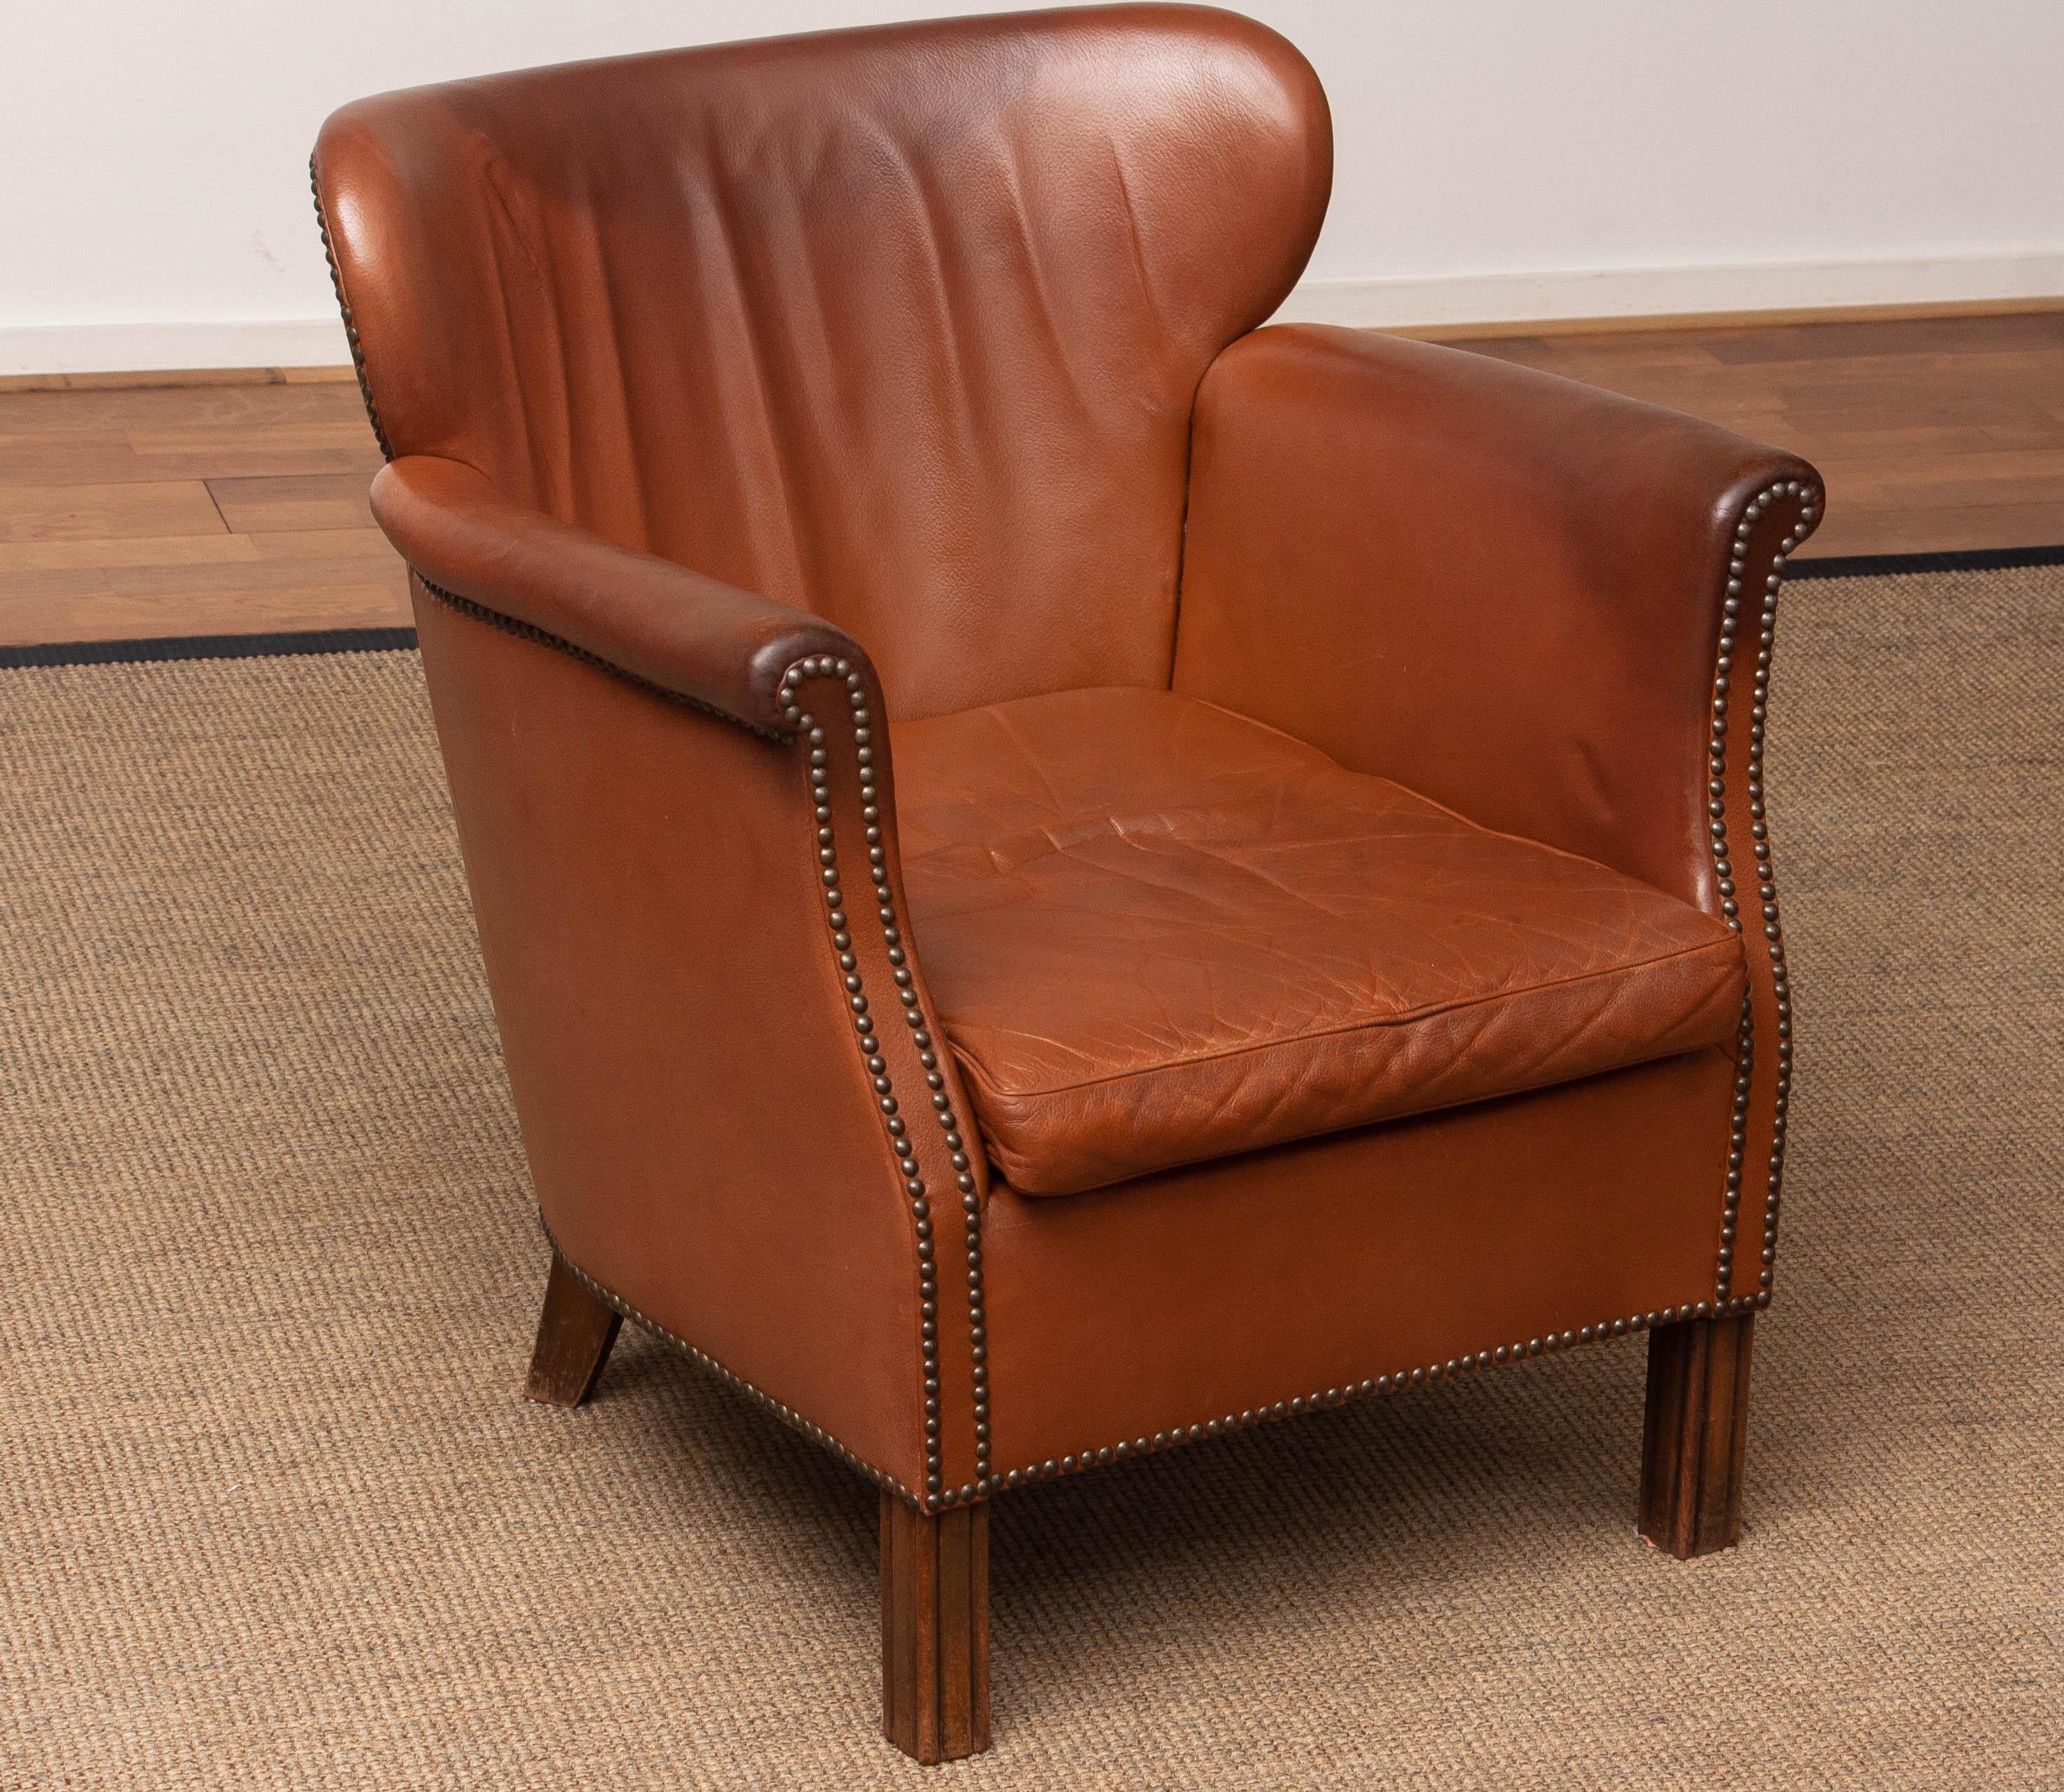 1940's Scandinavian Tan / Brown Nailed Leather Club / Cigar Chair from Denmark 5